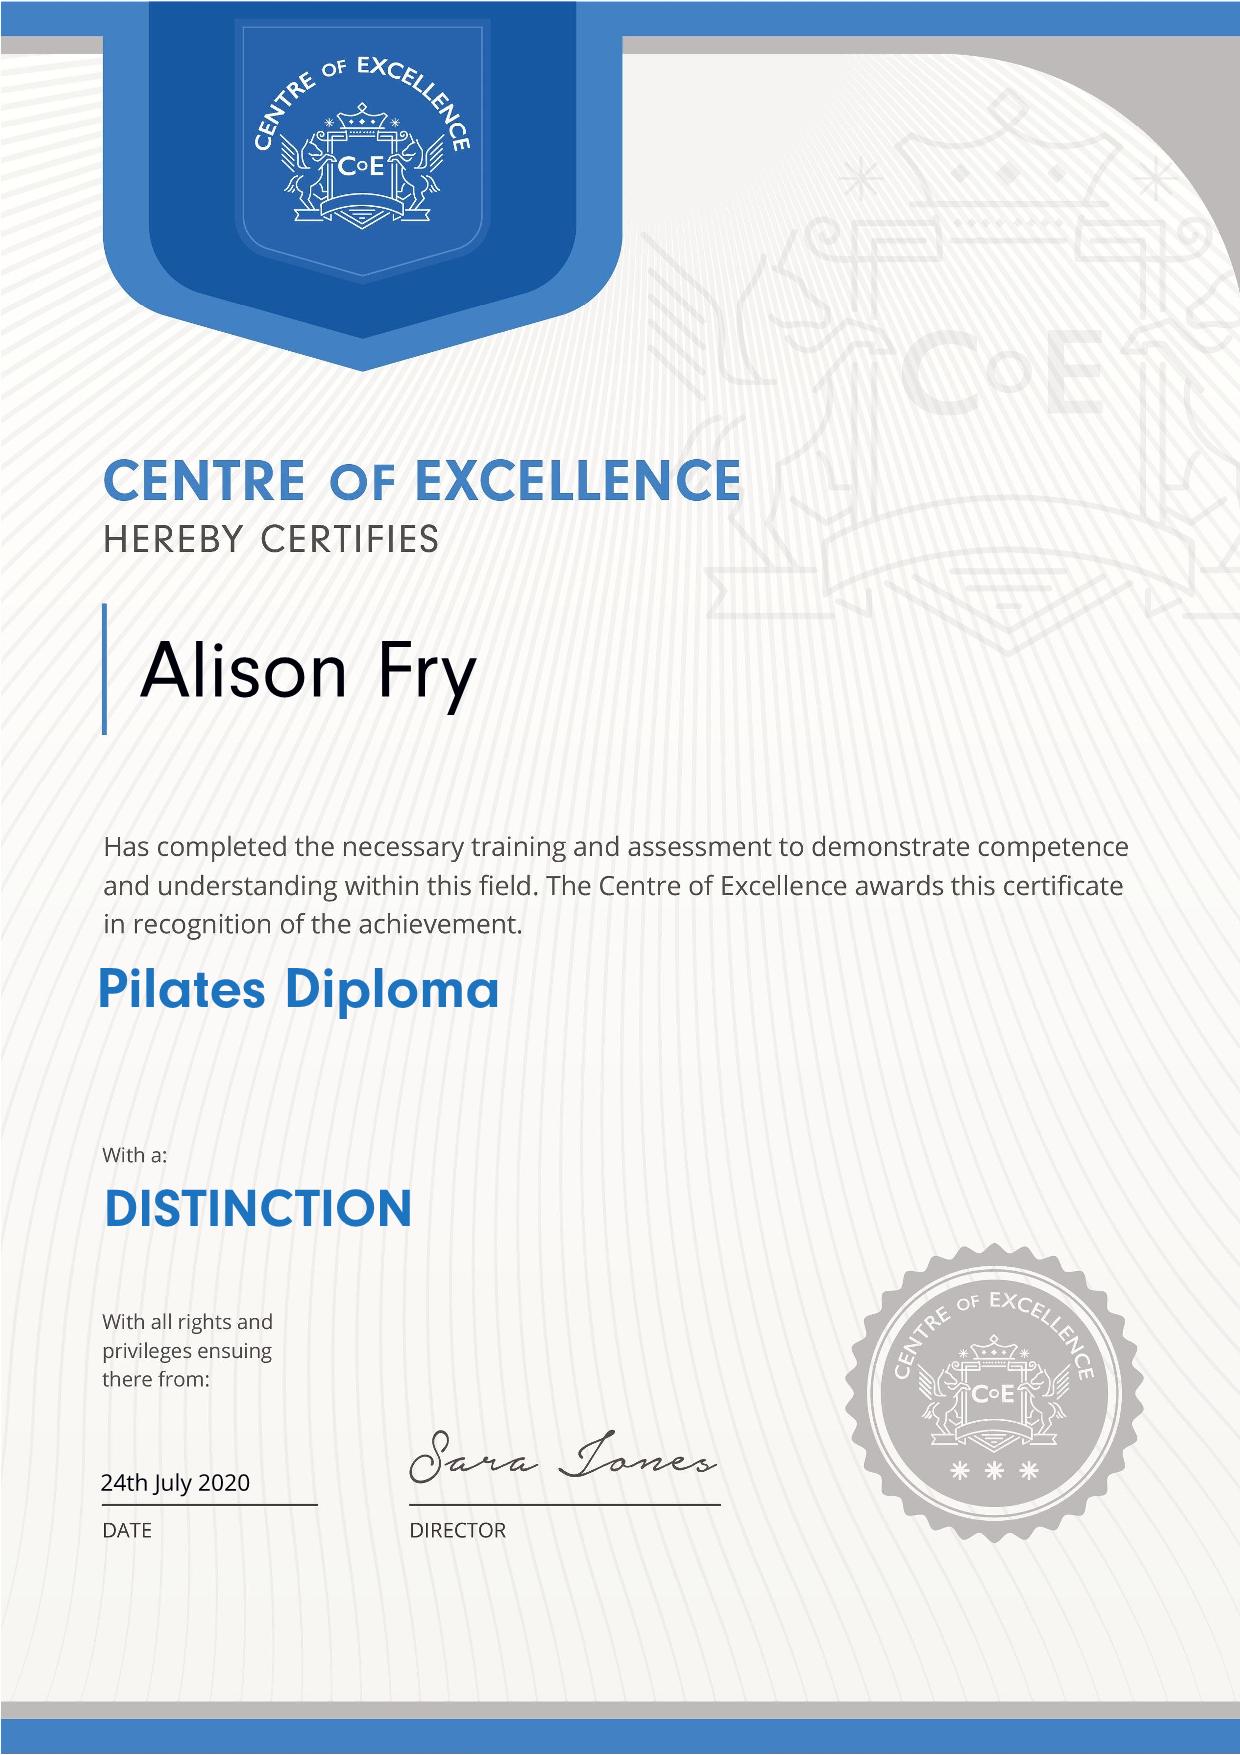 Centre of Excellence Pilates Diploma - Distinction - 24th July 2020